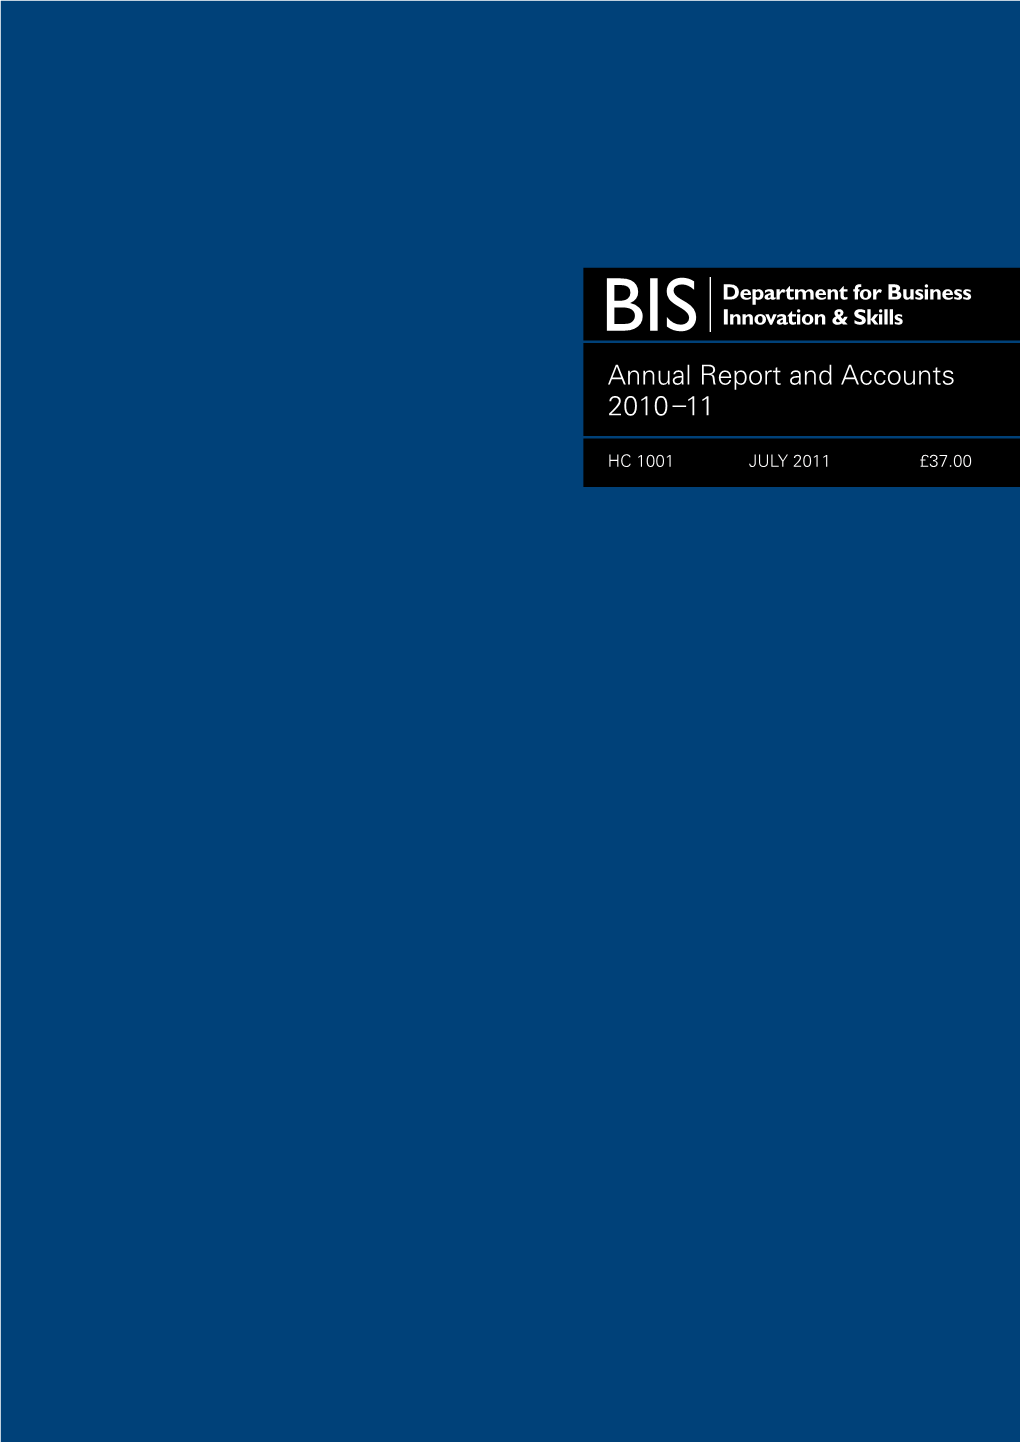 BIS Annual Report and Accounts 2010-11